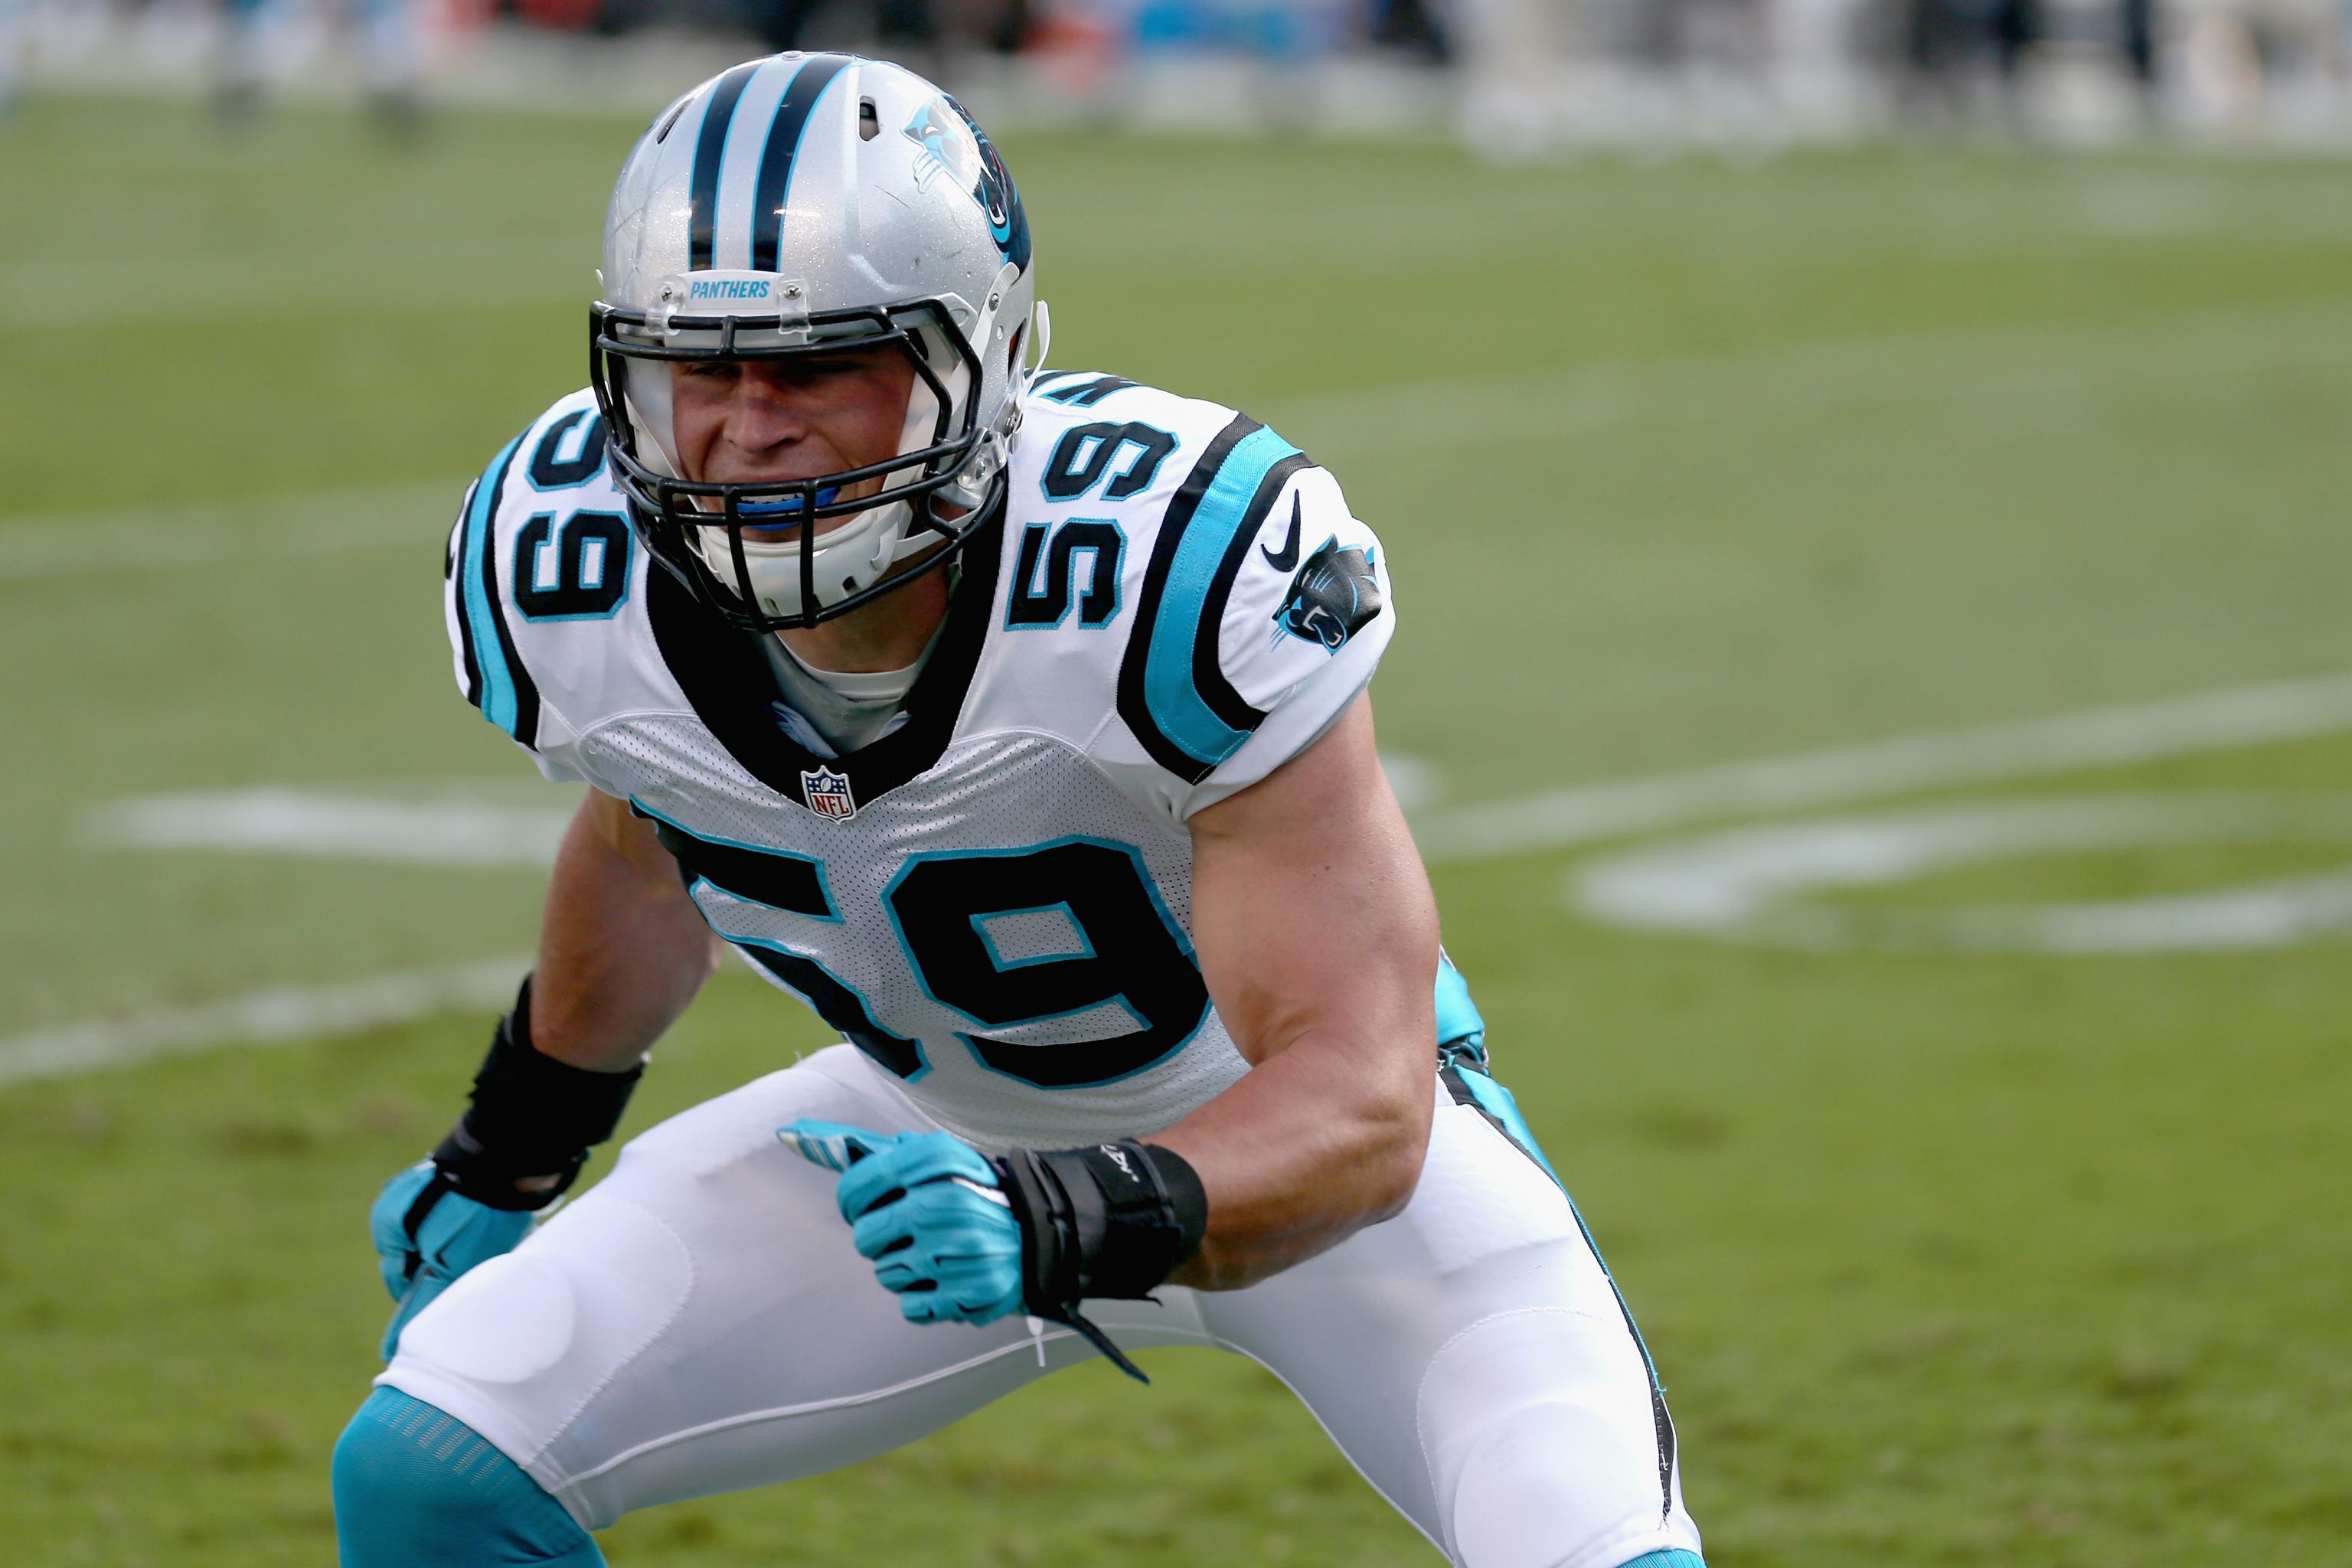 Luke Kuechly Injury: Updates on Panthers Star's Recovery from